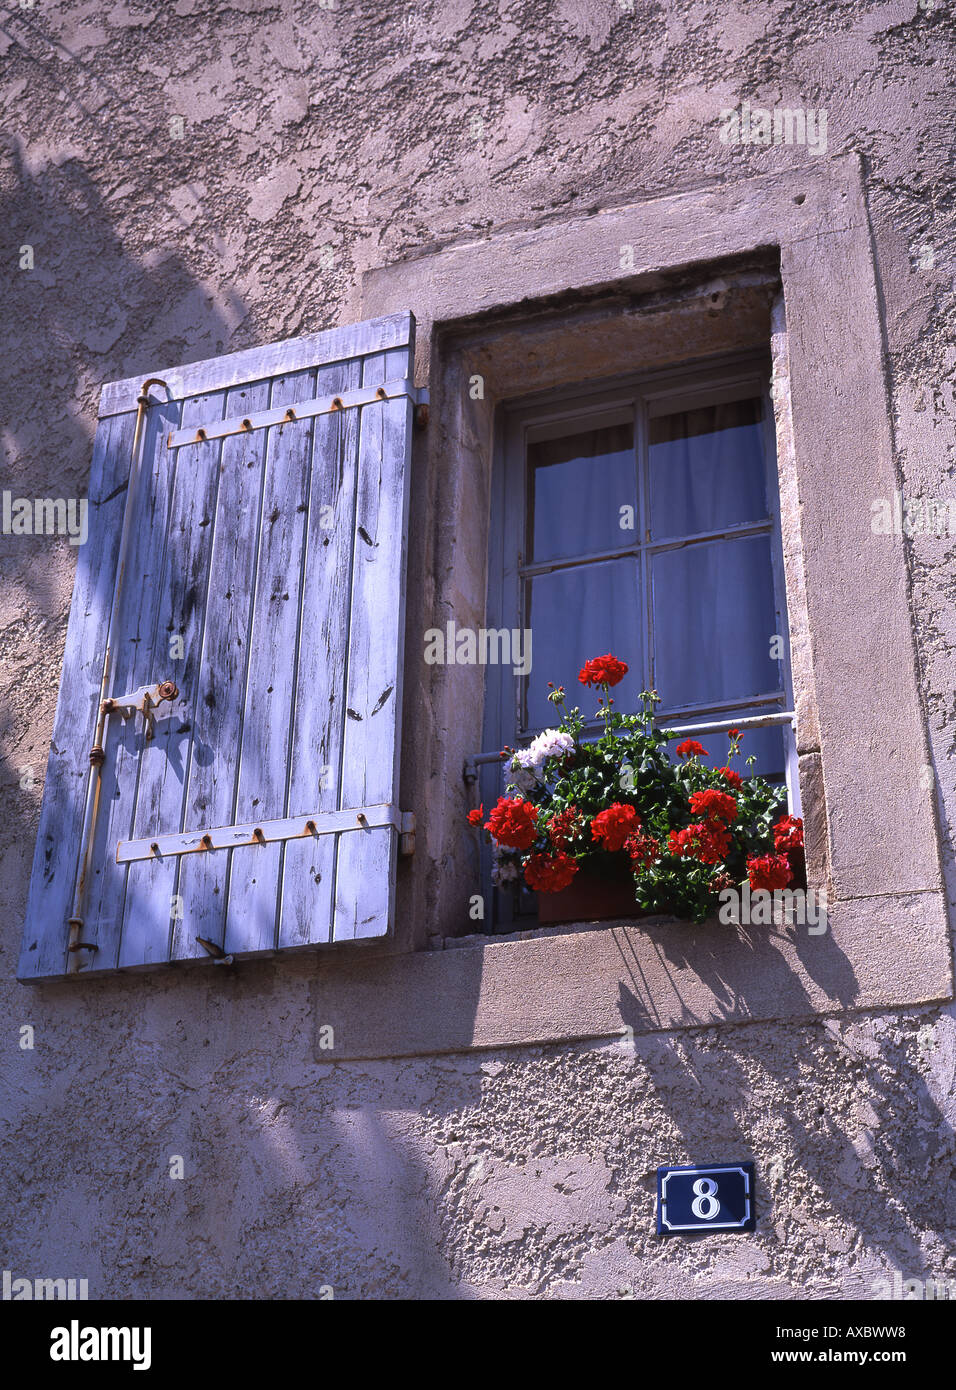 Traditional house with window shutters, balcony and flower baskets St Rémy de Provence France Stock Photo